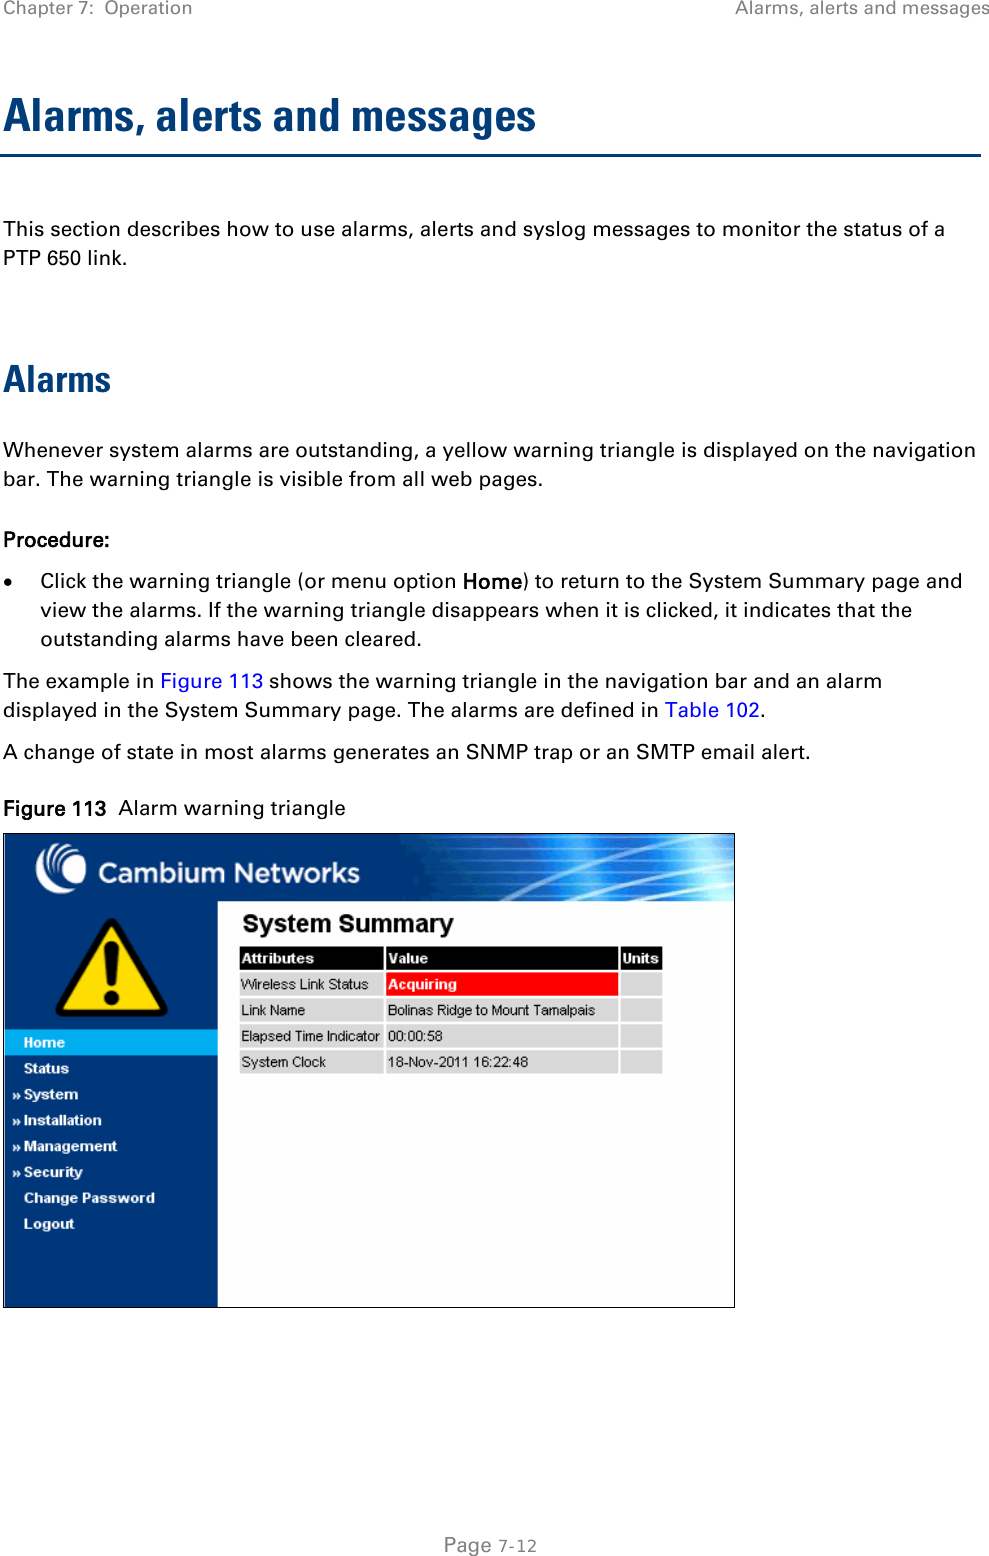 Chapter 7:  Operation Alarms, alerts and messages  Alarms, alerts and messages This section describes how to use alarms, alerts and syslog messages to monitor the status of a PTP 650 link.  Alarms Whenever system alarms are outstanding, a yellow warning triangle is displayed on the navigation bar. The warning triangle is visible from all web pages. Procedure: • Click the warning triangle (or menu option Home) to return to the System Summary page and view the alarms. If the warning triangle disappears when it is clicked, it indicates that the outstanding alarms have been cleared. The example in Figure 113 shows the warning triangle in the navigation bar and an alarm displayed in the System Summary page. The alarms are defined in Table 102. A change of state in most alarms generates an SNMP trap or an SMTP email alert. Figure 113  Alarm warning triangle   Page 7-12 